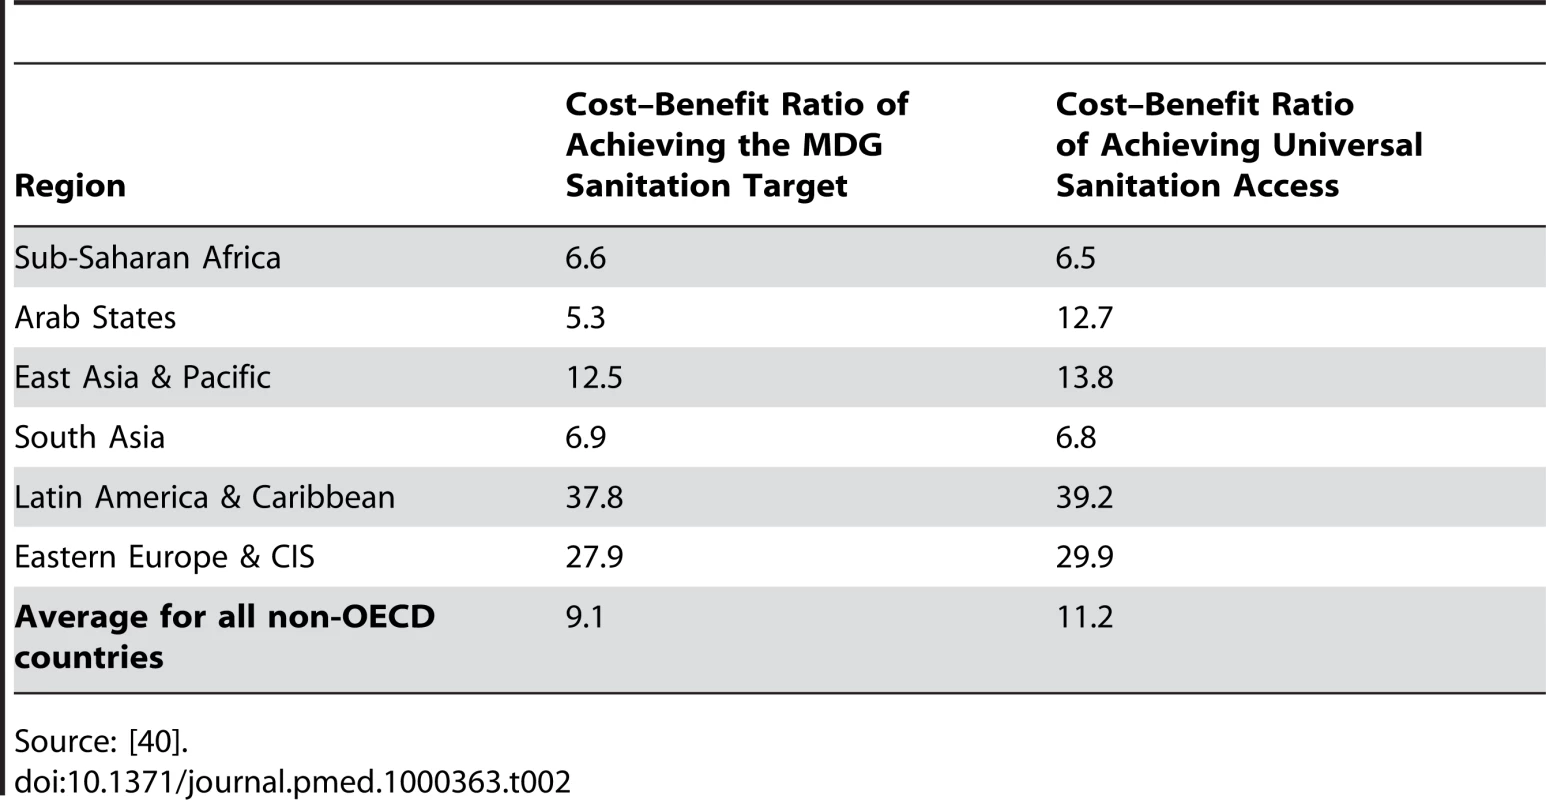 Cost-benefit ratios for achieving the MDG water supply and sanitation targets and for universal water supply and sanitation coverage.